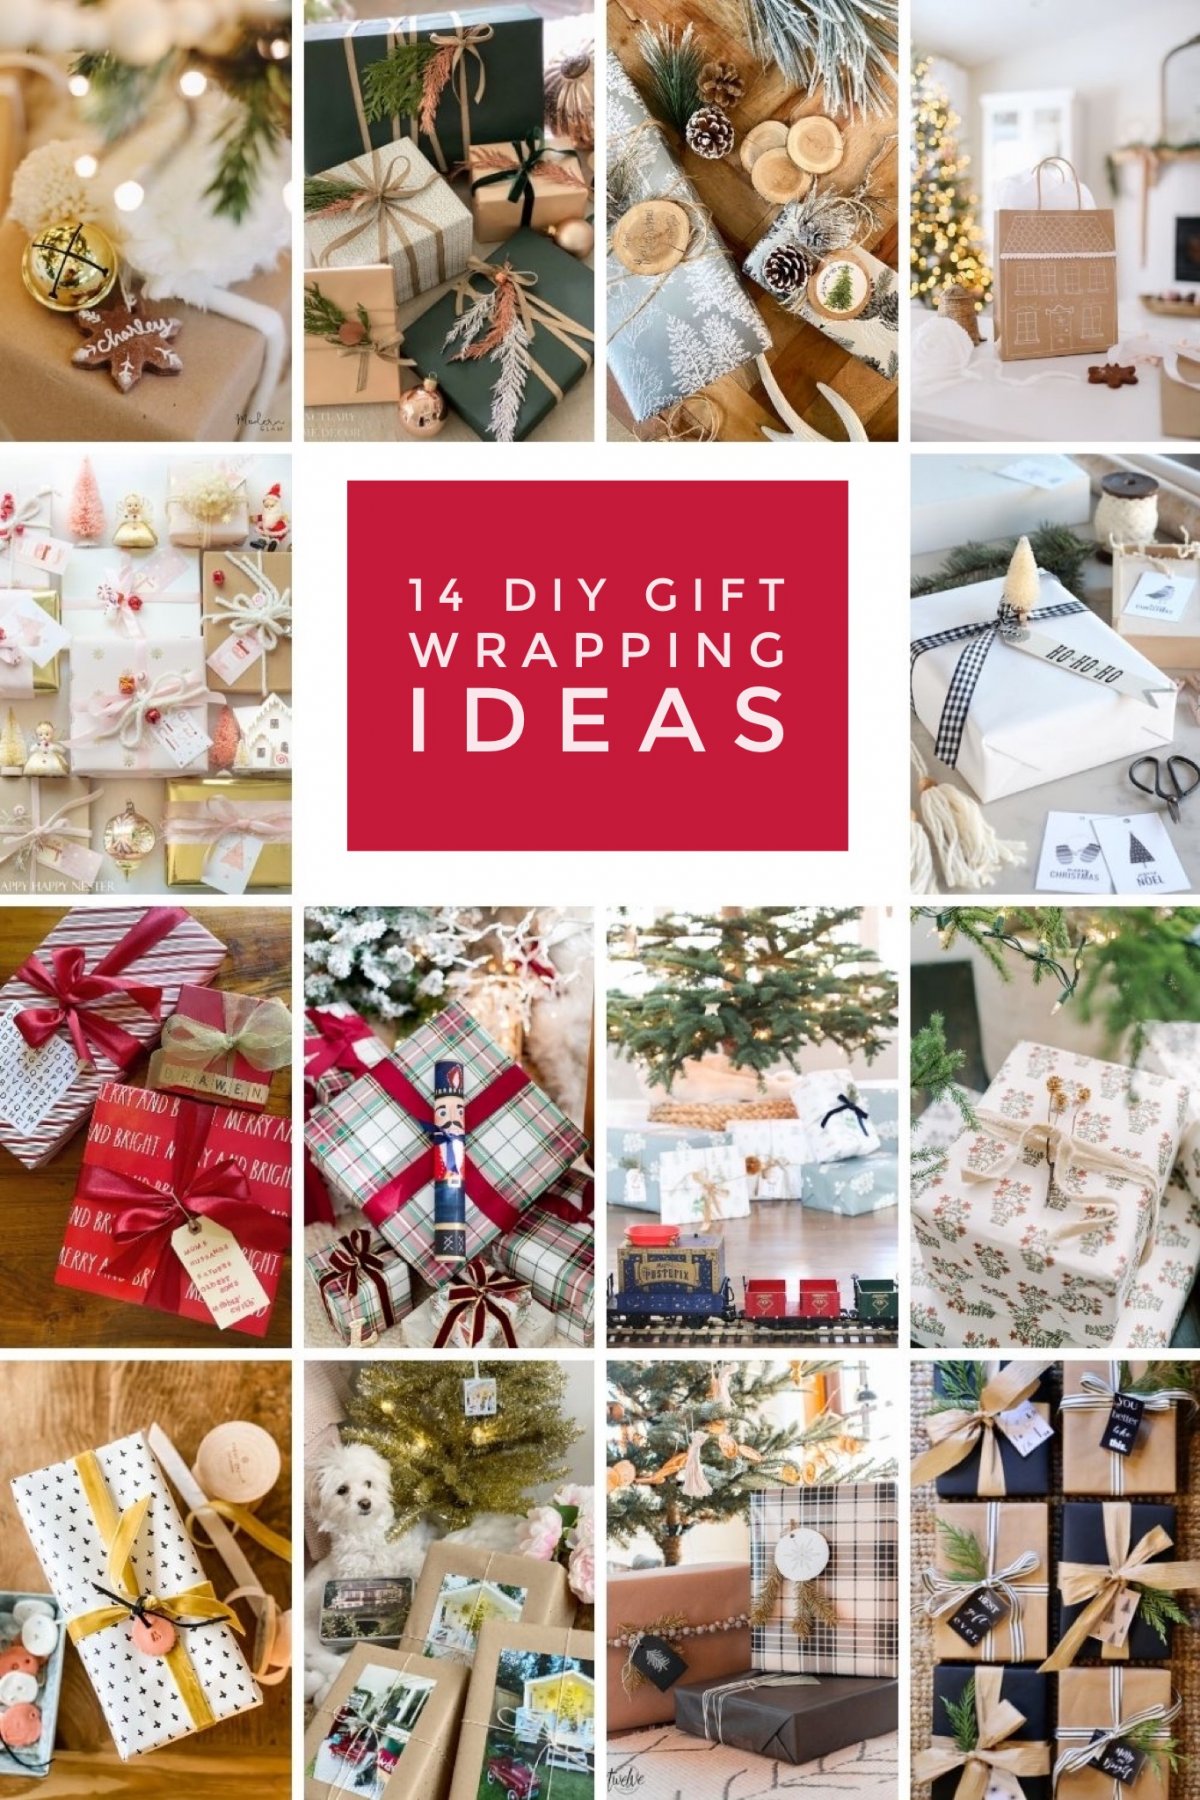 Today I am sharing a really fun idea for the holidays! If you are looking for creative ideas for gift wrapping then you want to look at these very funny gift tag ideas!